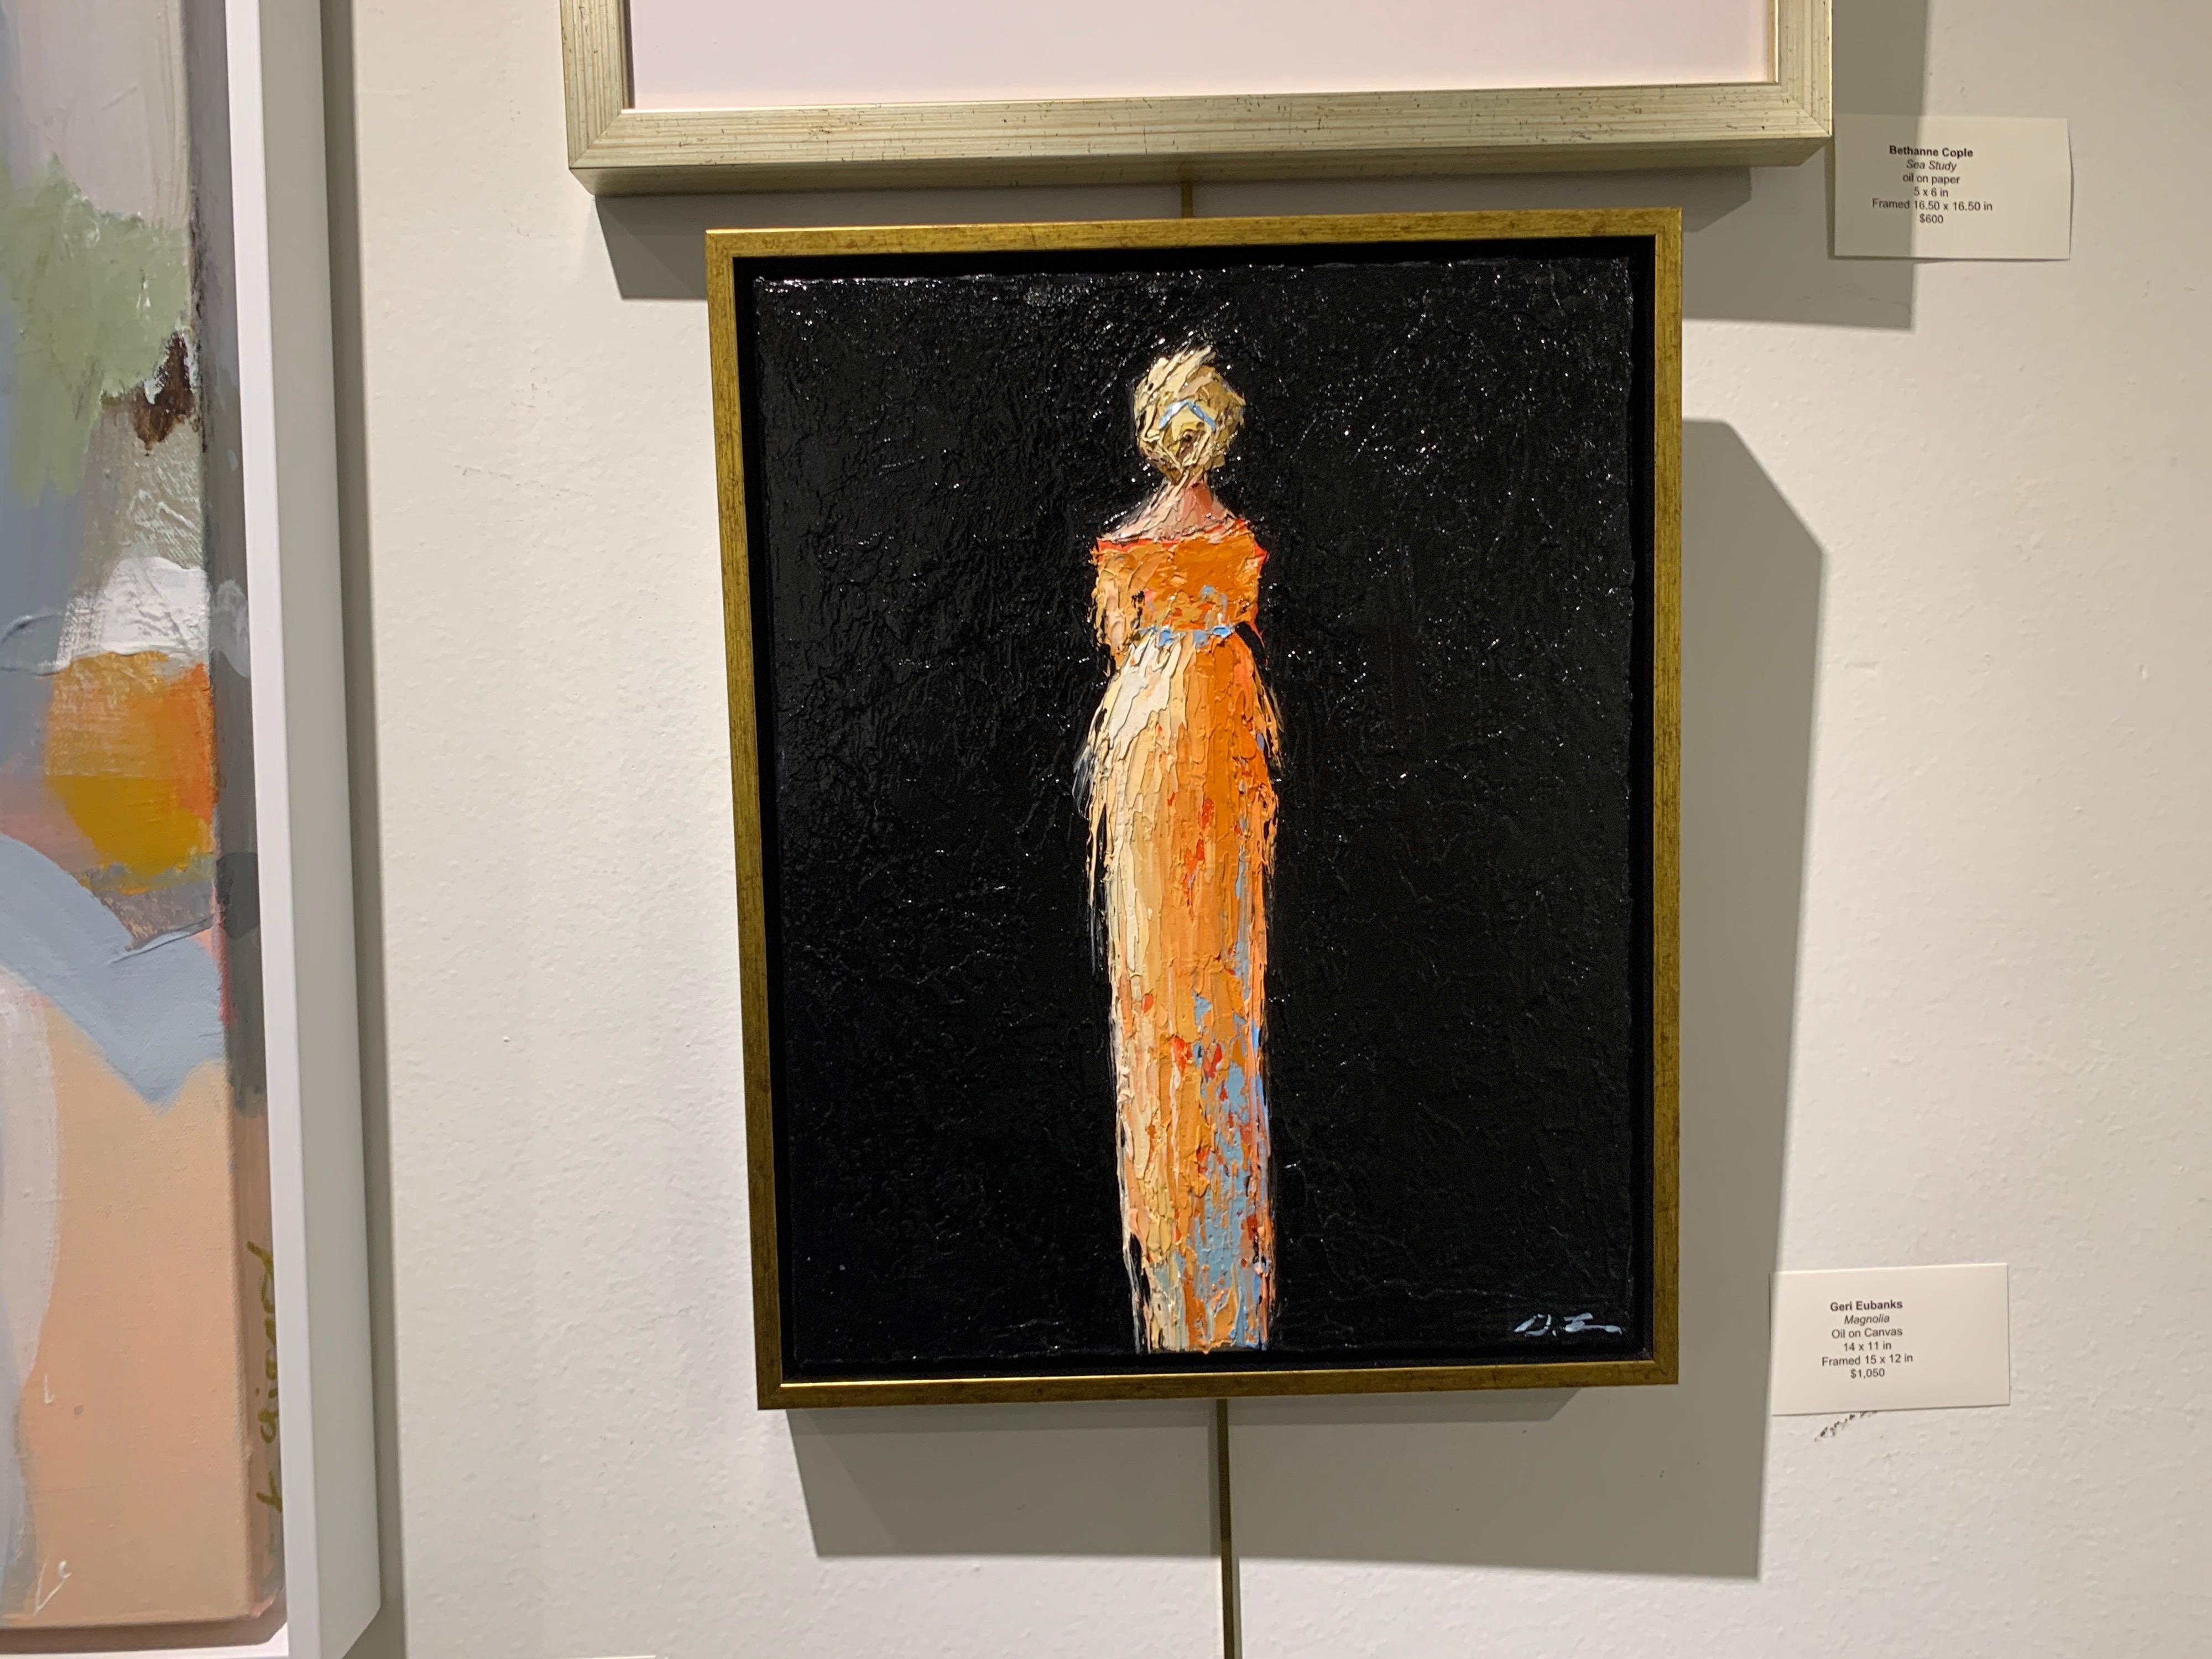 'Magnolia' is a framed Impressionist figurative oil on canvas painting of vertical format, created by American artist Geri Eubanks in 2021. Featuring a palette made of blue, orange, cream black and coral tones, the painting depicts an elegant blond